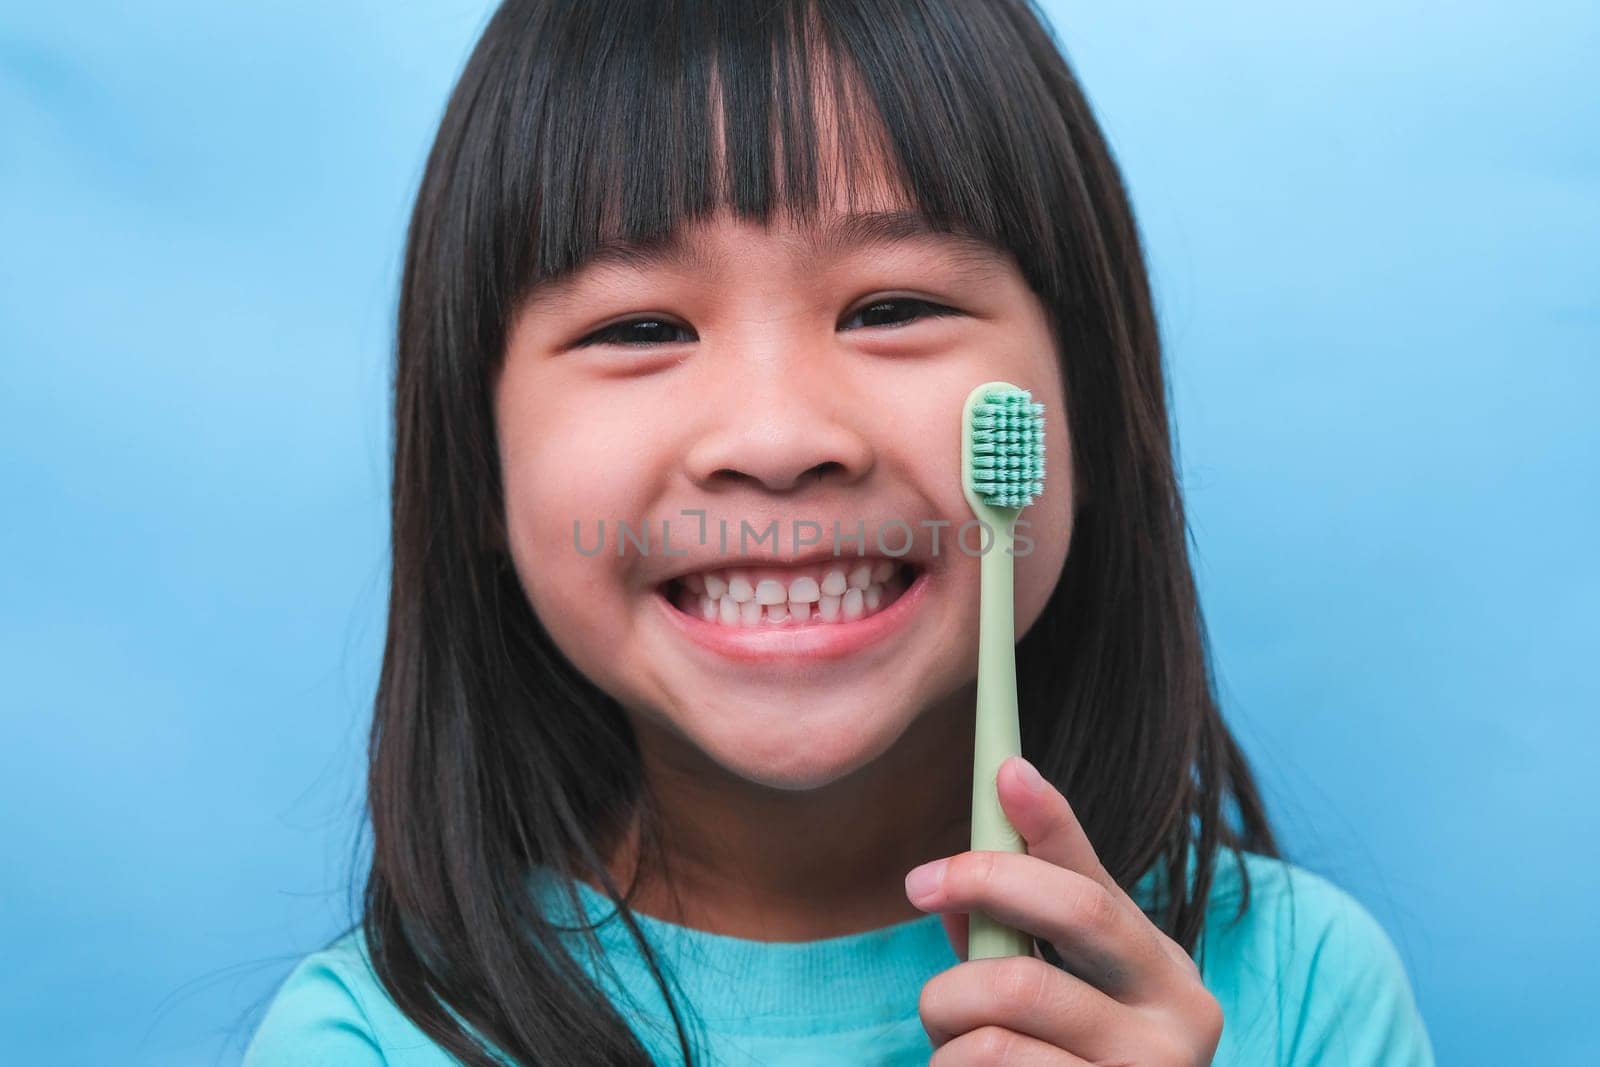 Smiling cute little girl holding toothbrush isolated on blue background. Cute little child brushing teeth. Kid training oral hygiene, Tooth decay prevention or dental care concept.